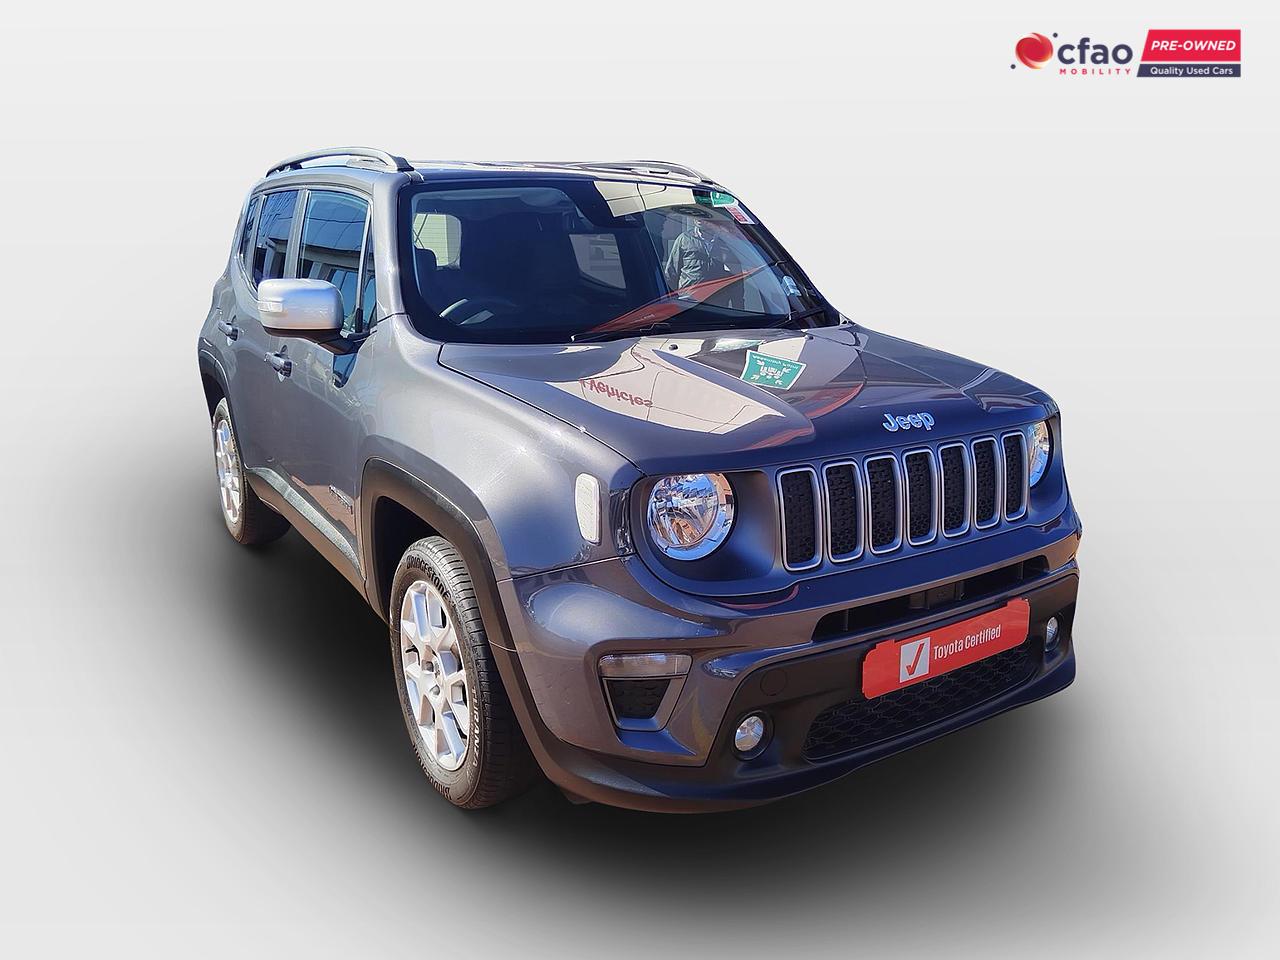 2022 Jeep Renegade 1.4T Limited